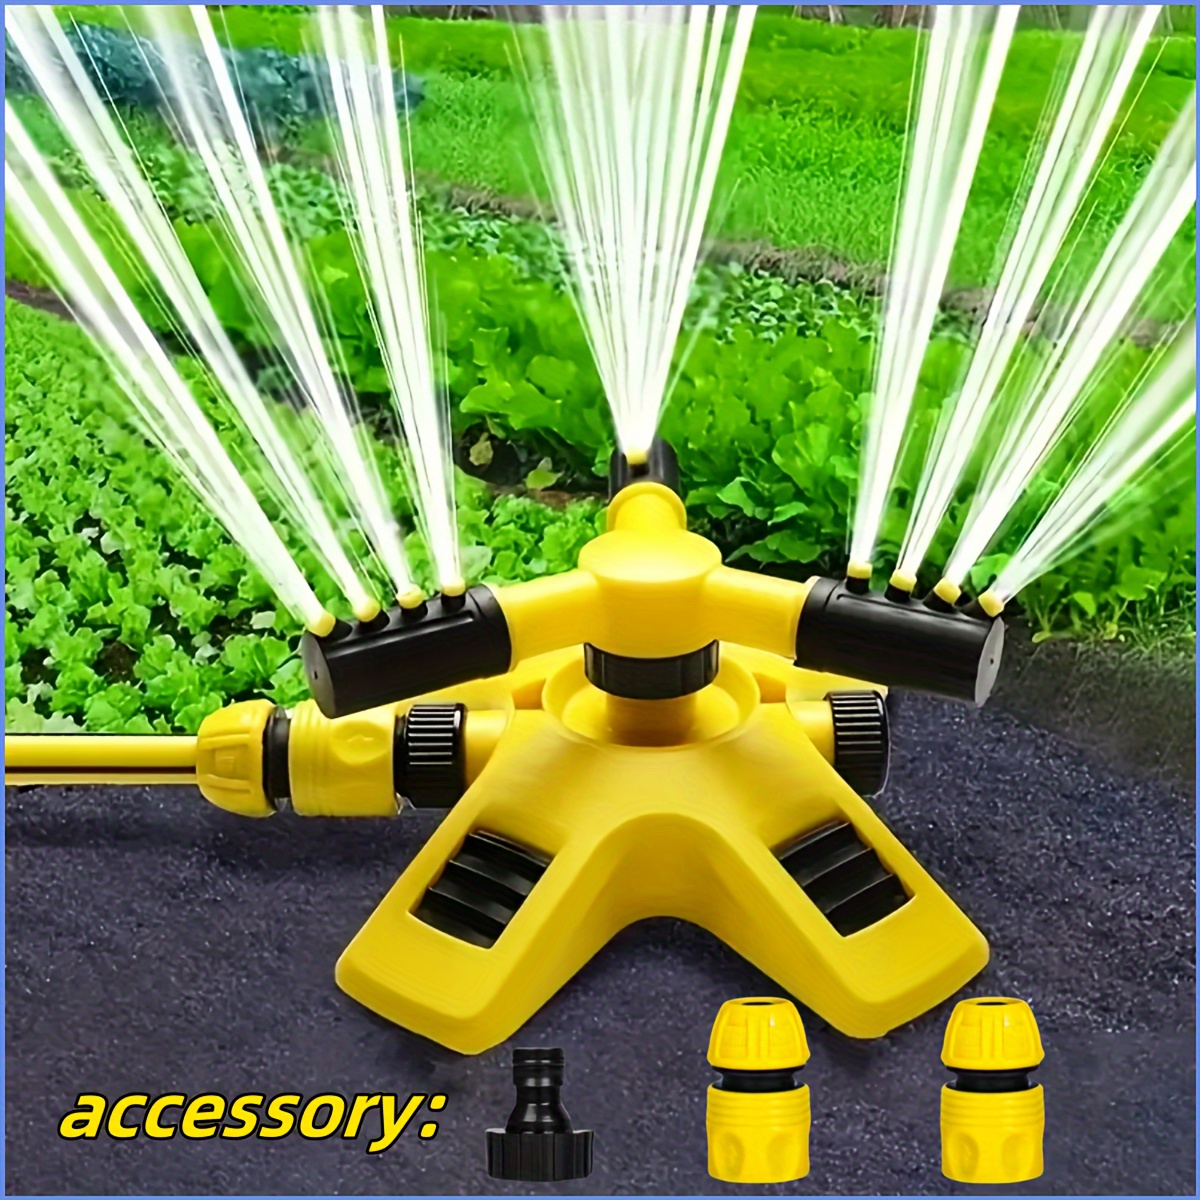 

360° Rotating Lawn Sprinkler With 3 Adjustable Arms, Tow-behind-style Automatic Irrigation System, Plastic Sprayers With Multiple Components For Garden And Roof Cooling - Yellow